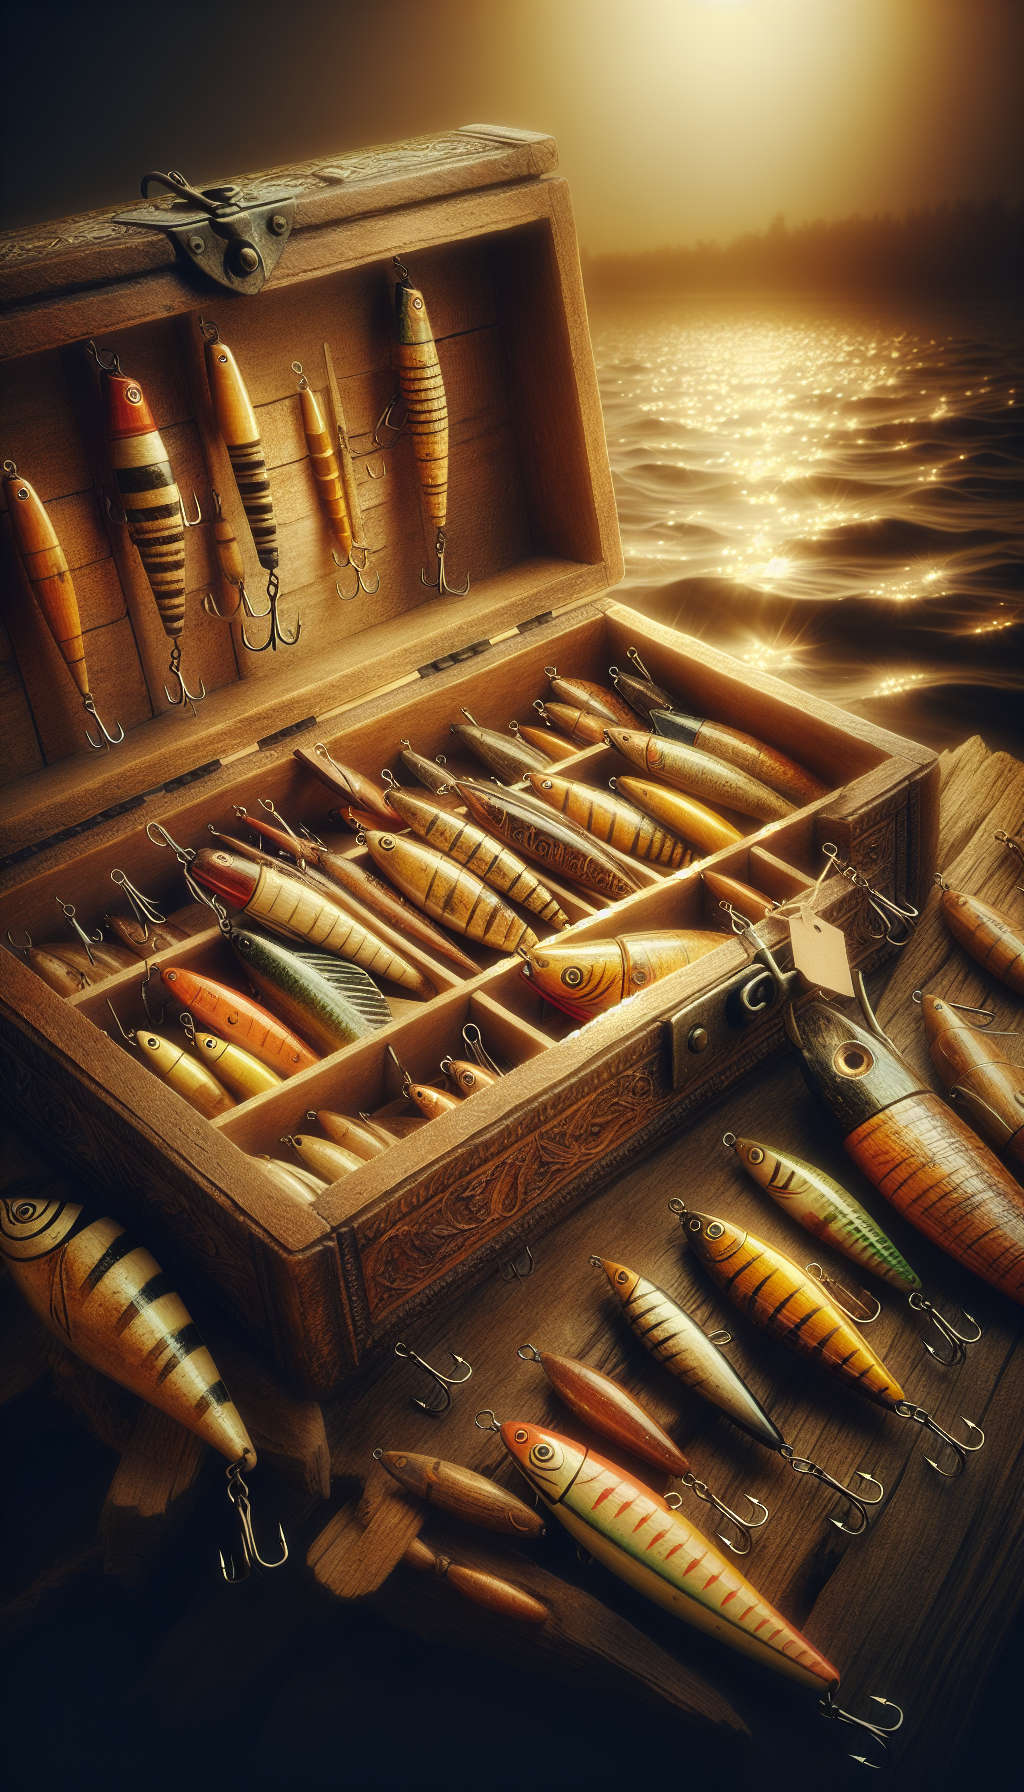 An intricately detailed wooden chest overflows with aged wooden fishing lures, each carved and painted with a patina of bygone eras. A nostalgic sepia-toned backdrop awash with soft ripples suggests the waters these lures once traversed. Golden light highlights the wood's texture, subtly hinting at their hidden value, while a price tag dangles from the most prominent lure, emphasizing collectibility.